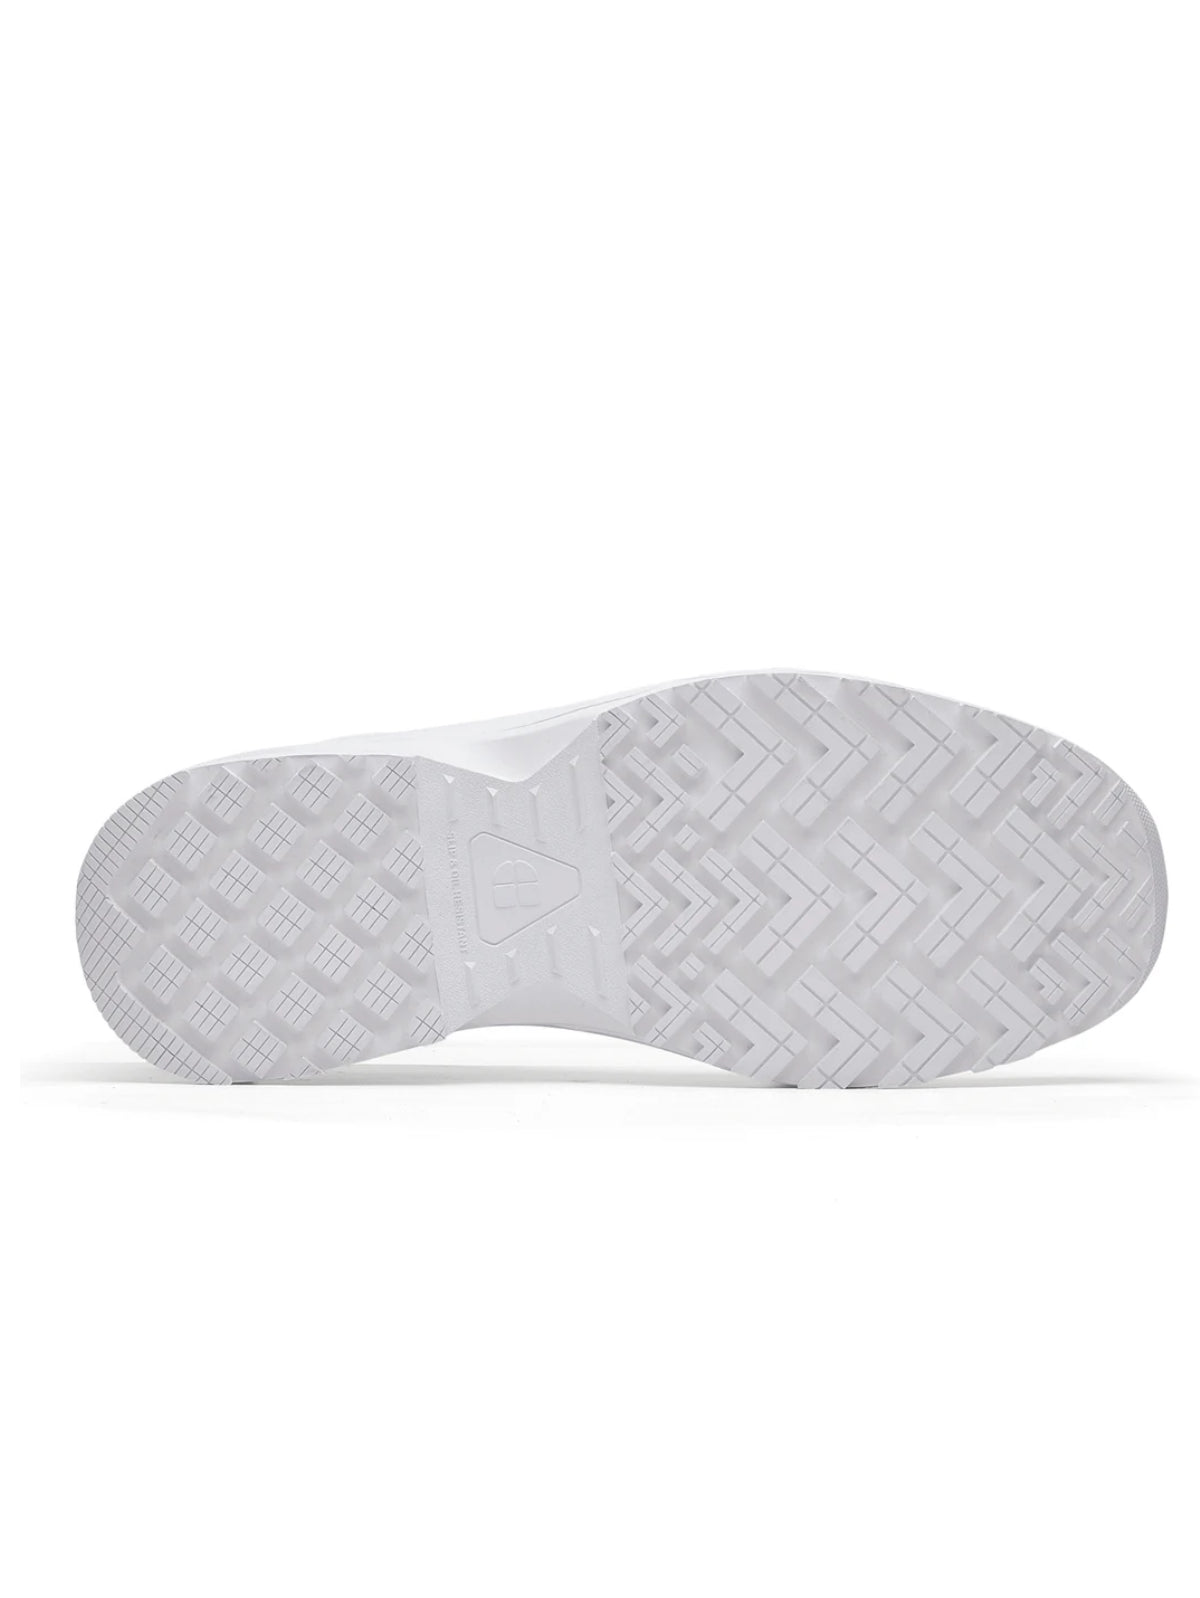 Unisex Safety Shoe Catania White (S3) by Shoes For Crews